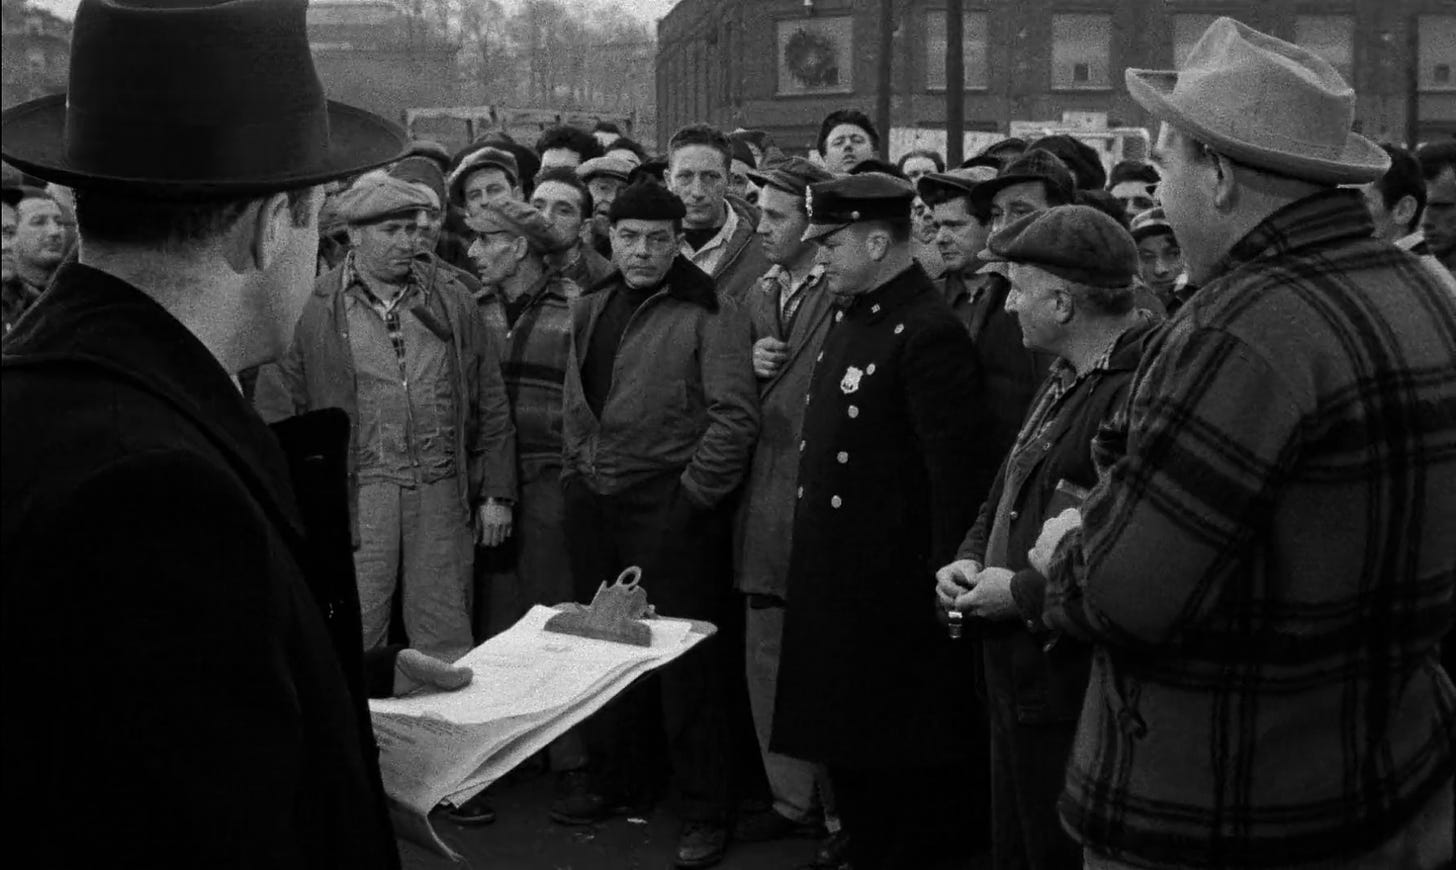 A scene from the 1954 film On the Waterfront that depicts the shape-up, a hiring practice by which dock gangs would be selected for a day's work